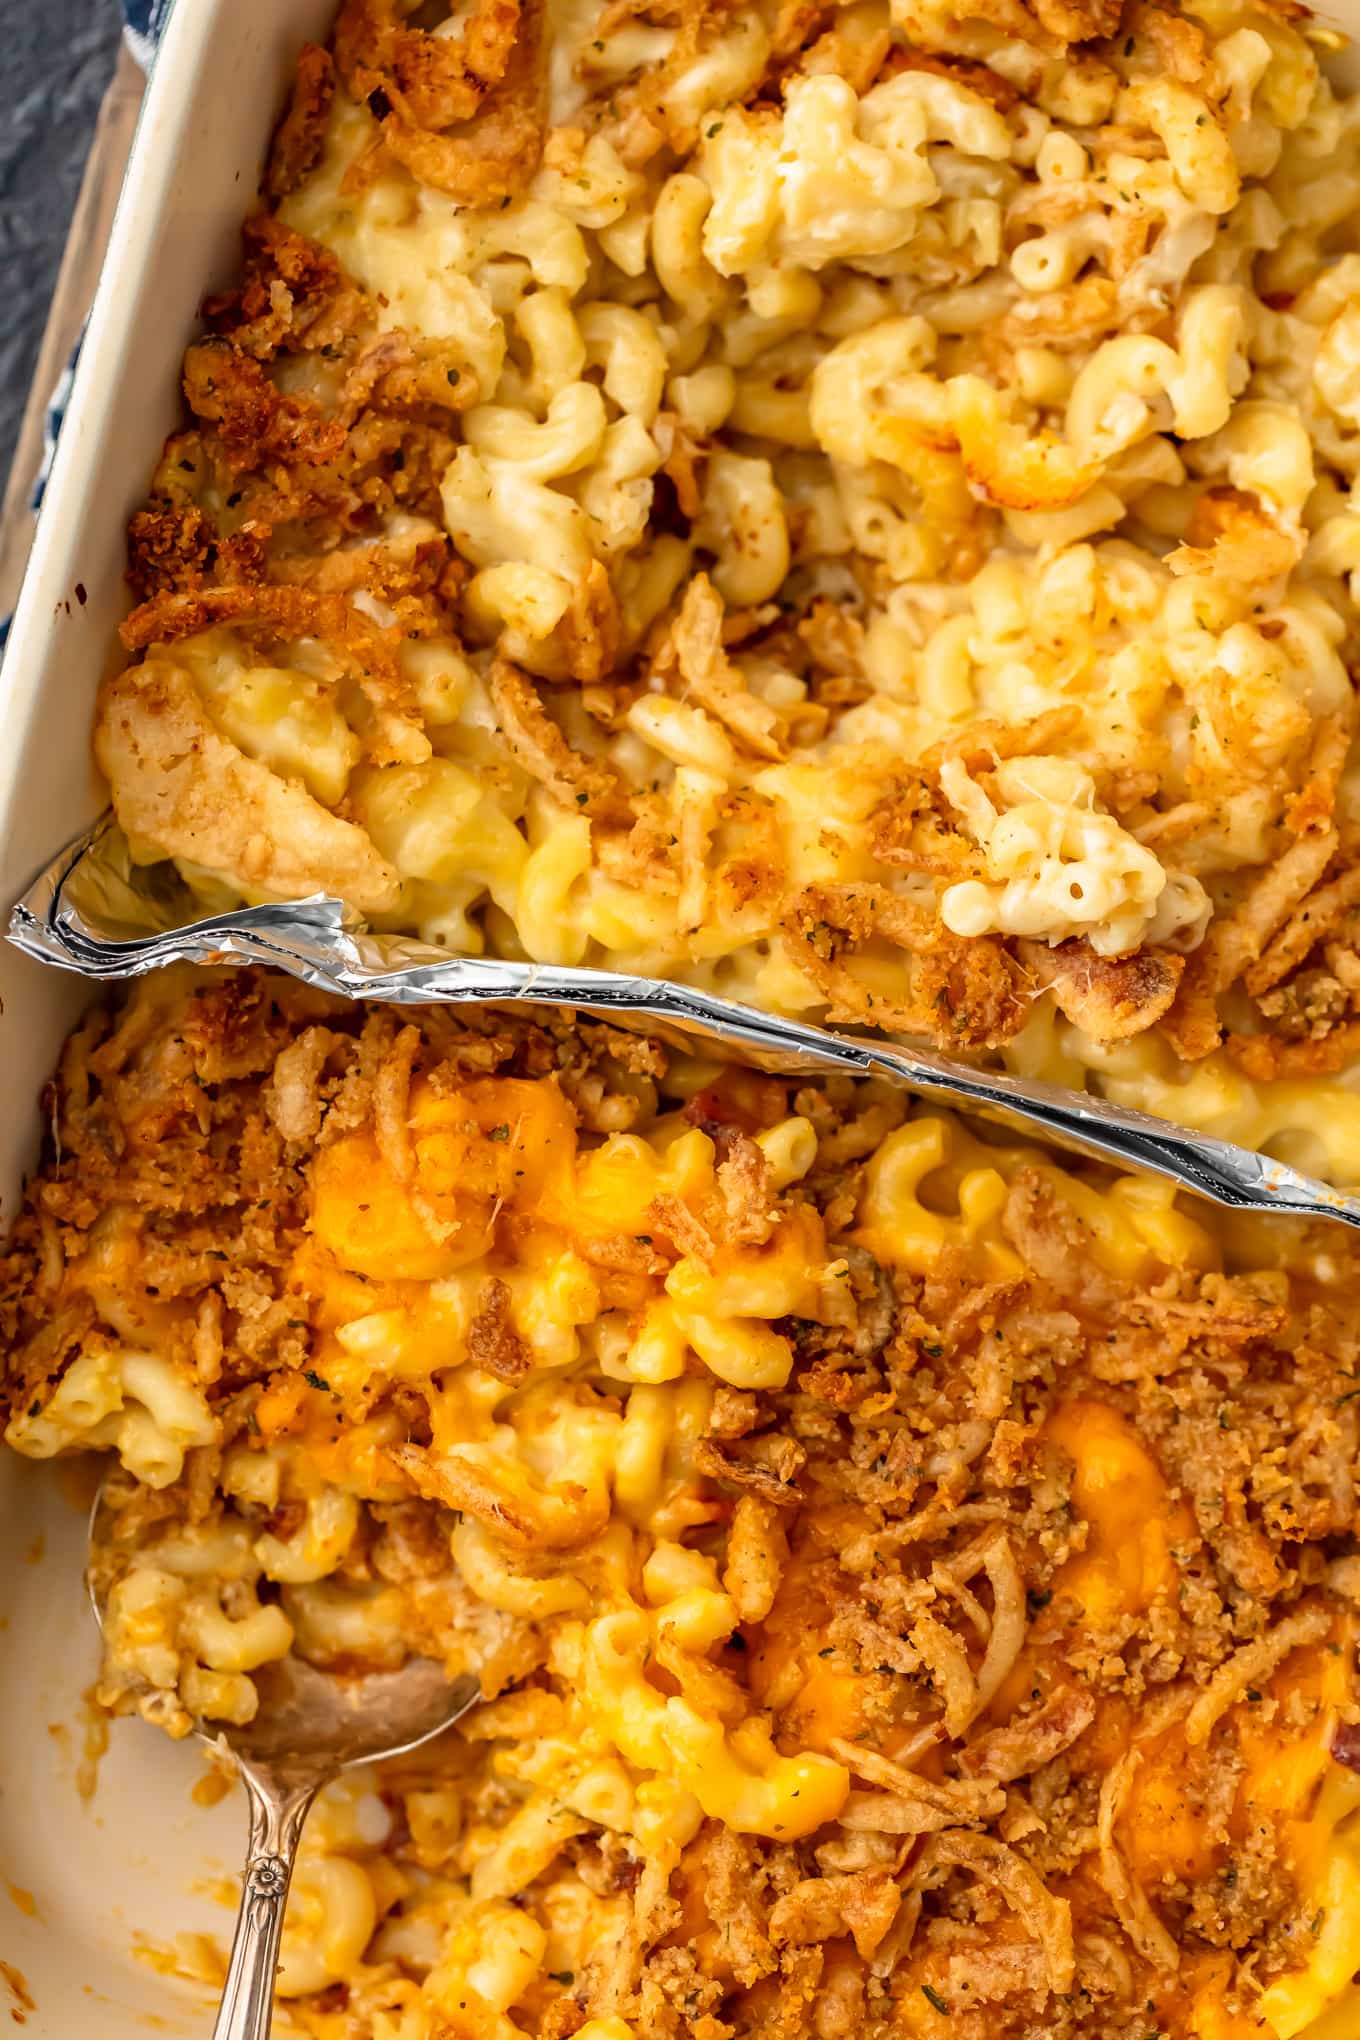 baked mac and cheese two ways in baking dish